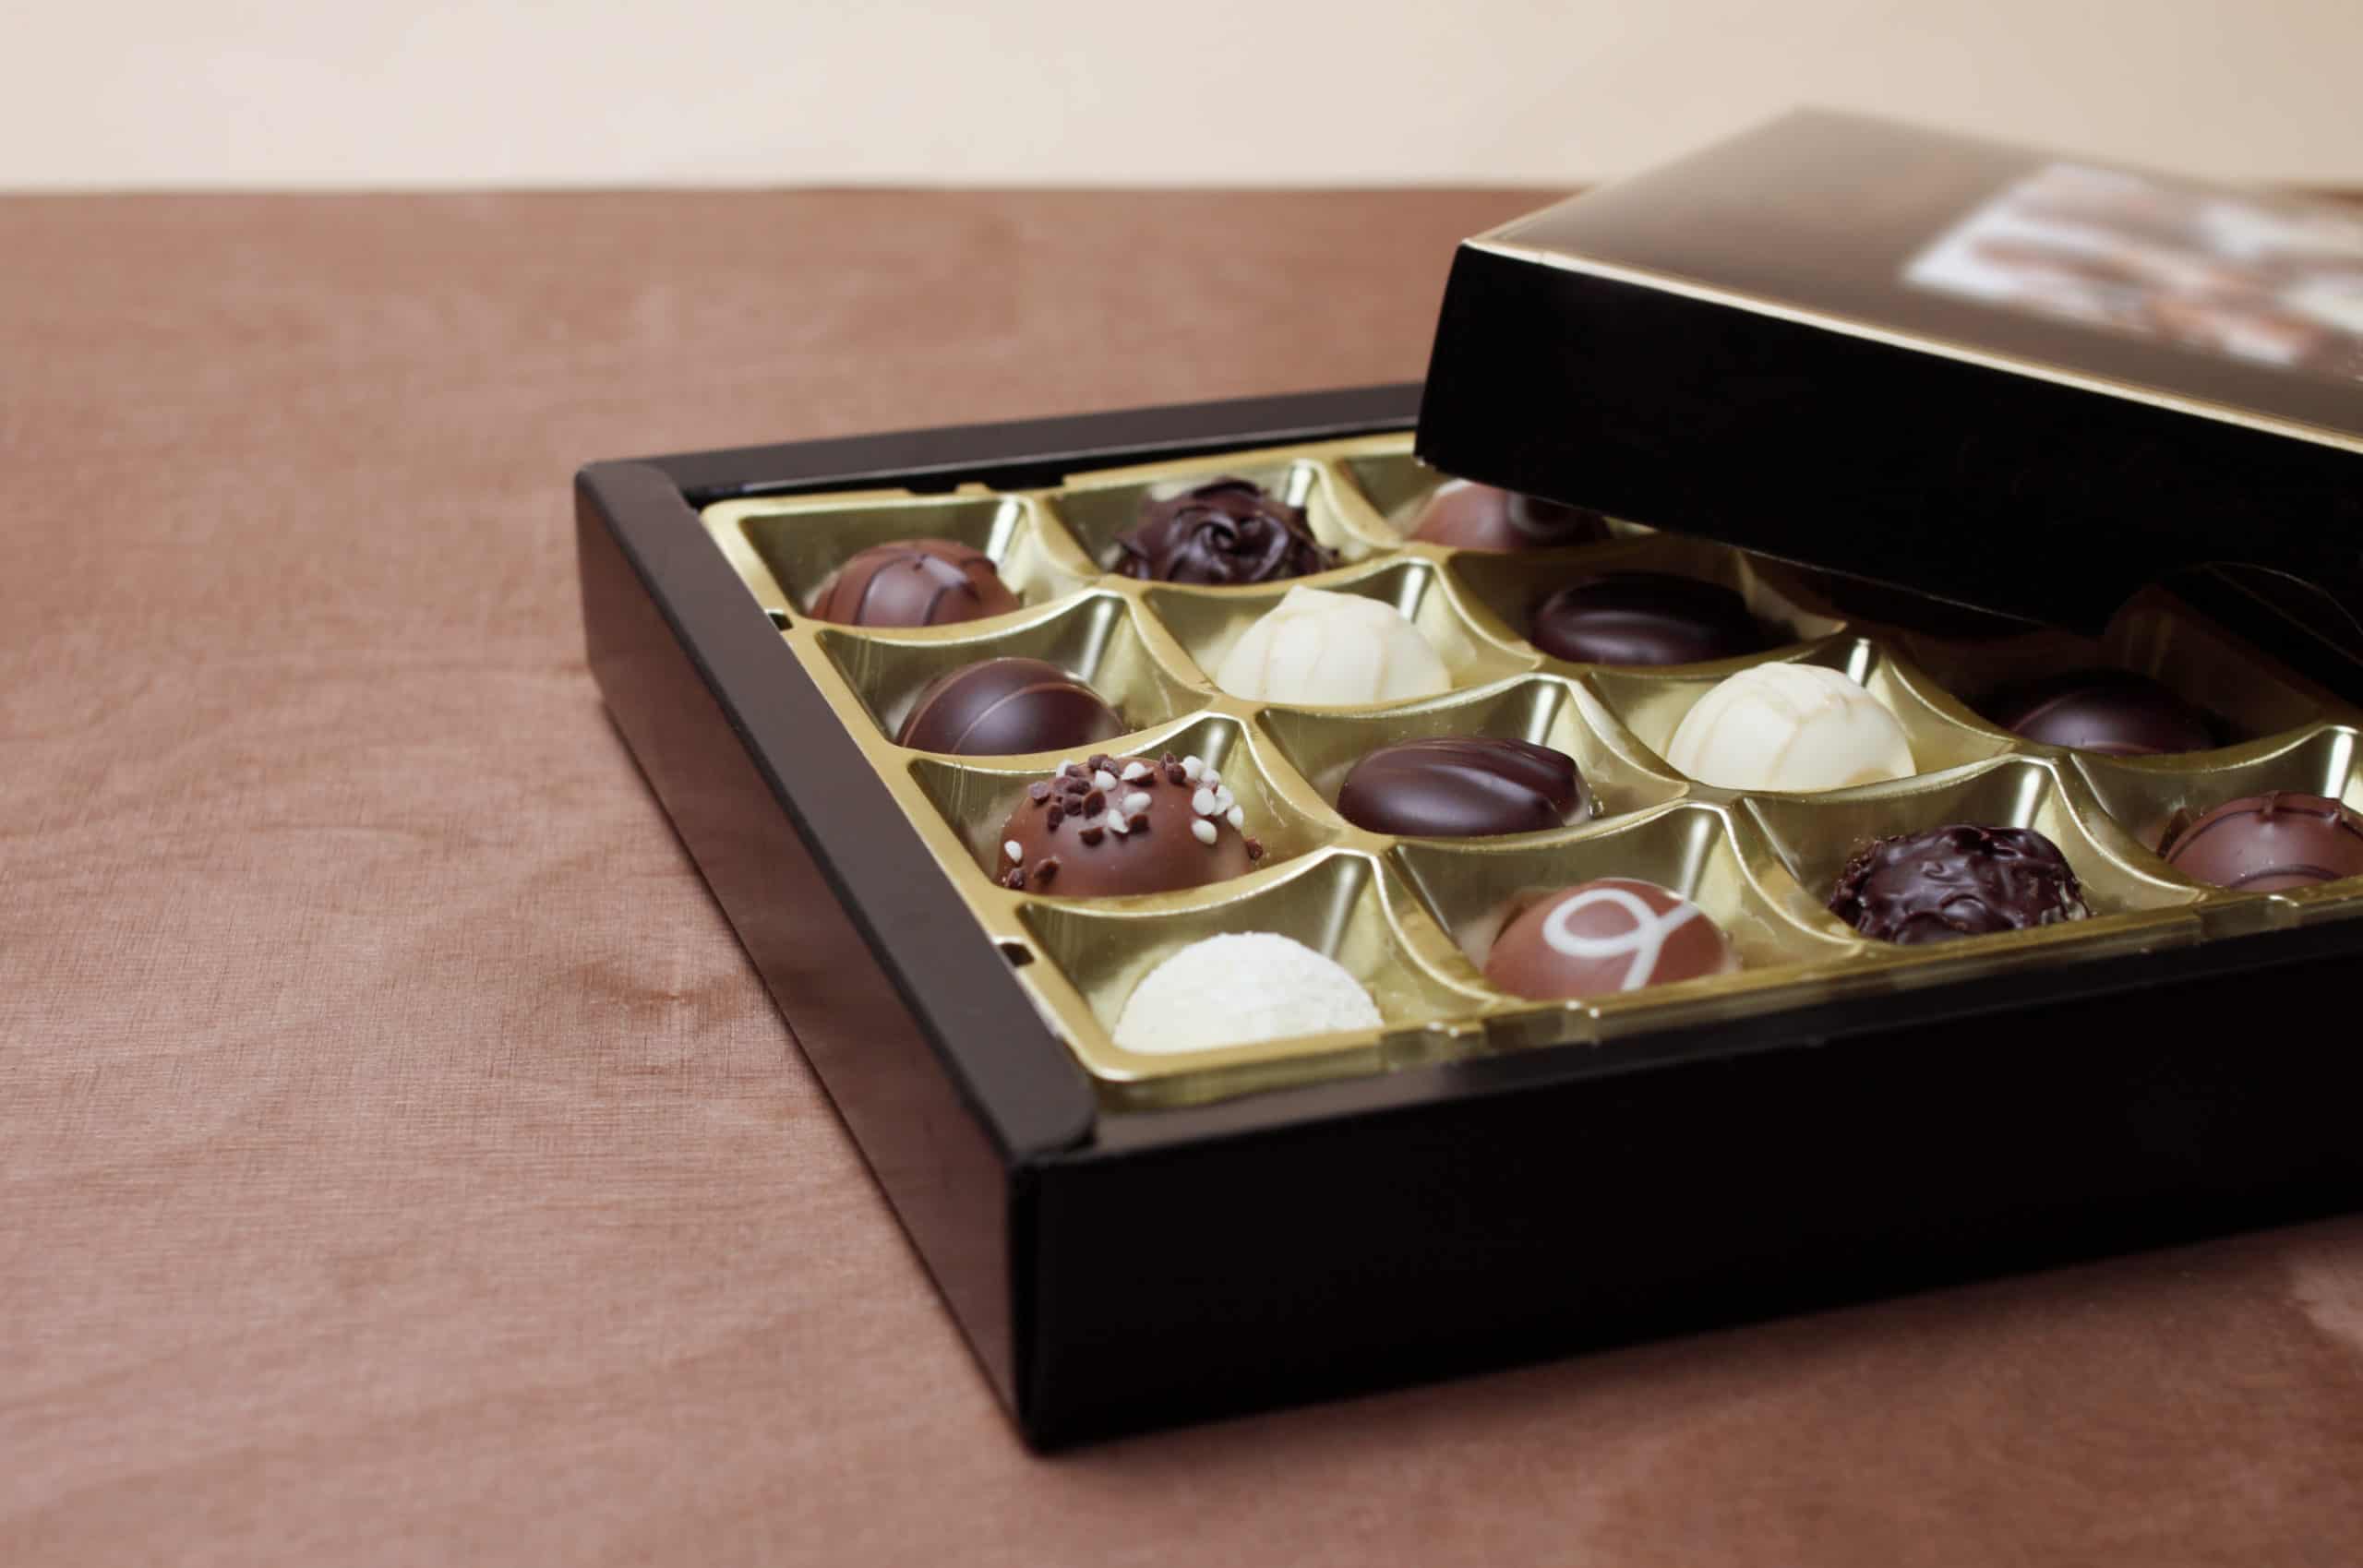 Close-up of a filled box of chocolates.